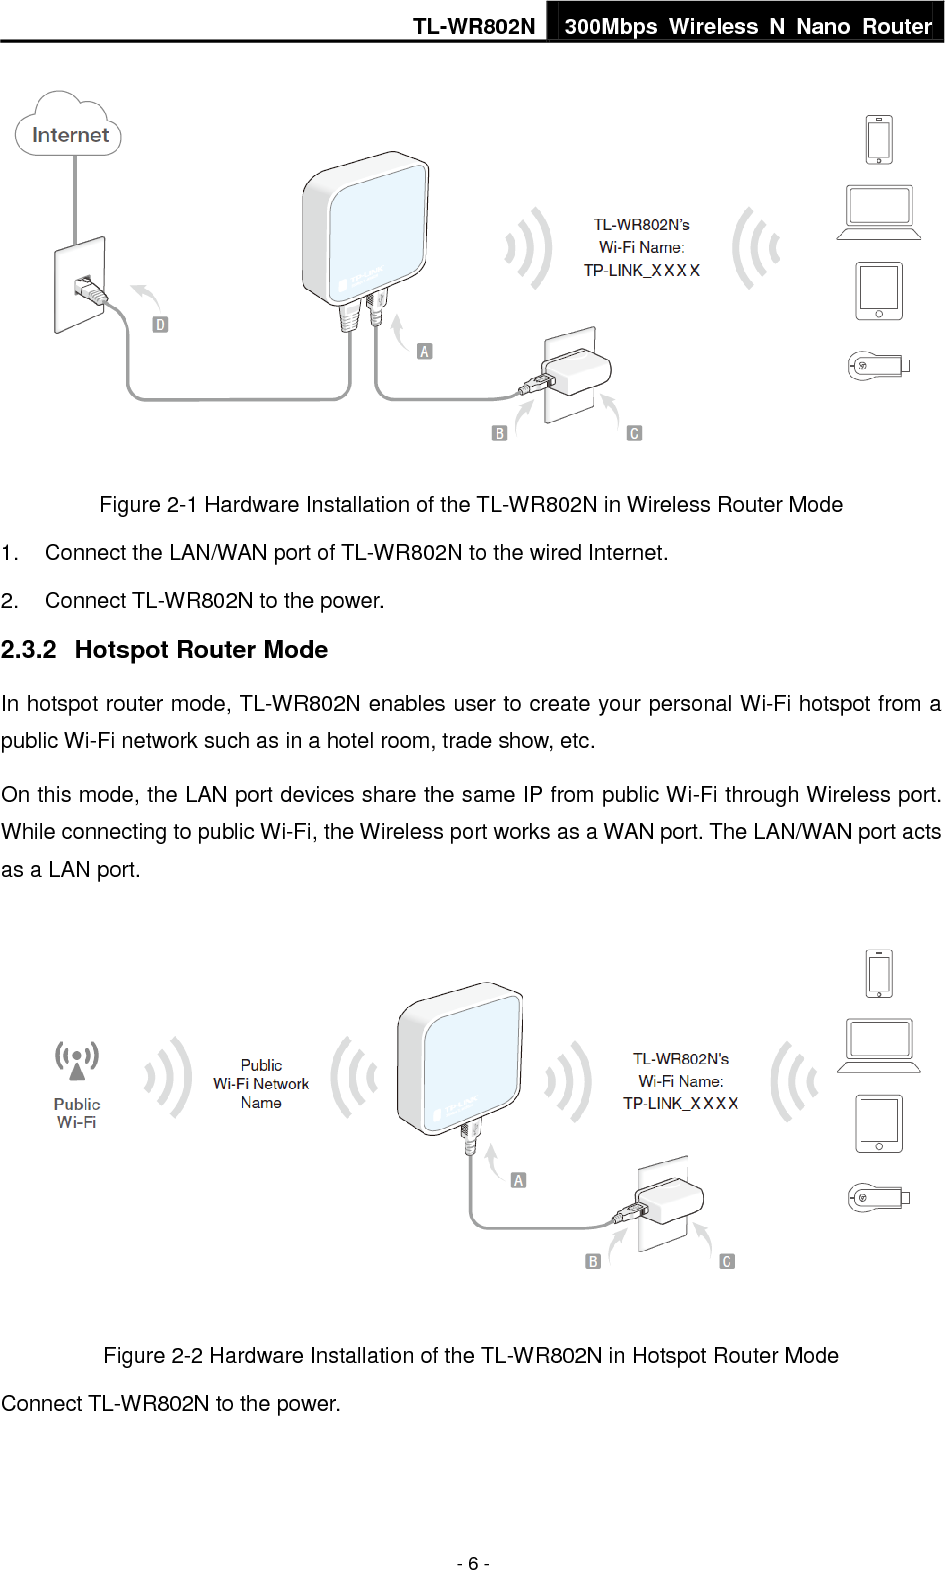 TL-WR802N 300Mbps  Wireless  N  Nano  Router  - 6 -  Figure 2-1 Hardware Installation of the TL-WR802N in Wireless Router Mode 1.  Connect the LAN/WAN port of TL-WR802N to the wired Internet. 2.  Connect TL-WR802N to the power. 2.3.2  Hotspot Router Mode In hotspot router mode, TL-WR802N enables user to create your personal Wi-Fi hotspot from a public Wi-Fi network such as in a hotel room, trade show, etc. On this mode, the LAN port devices share the same IP from public Wi-Fi through Wireless port. While connecting to public Wi-Fi, the Wireless port works as a WAN port. The LAN/WAN port acts as a LAN port.  Figure 2-2 Hardware Installation of the TL-WR802N in Hotspot Router Mode Connect TL-WR802N to the power. 